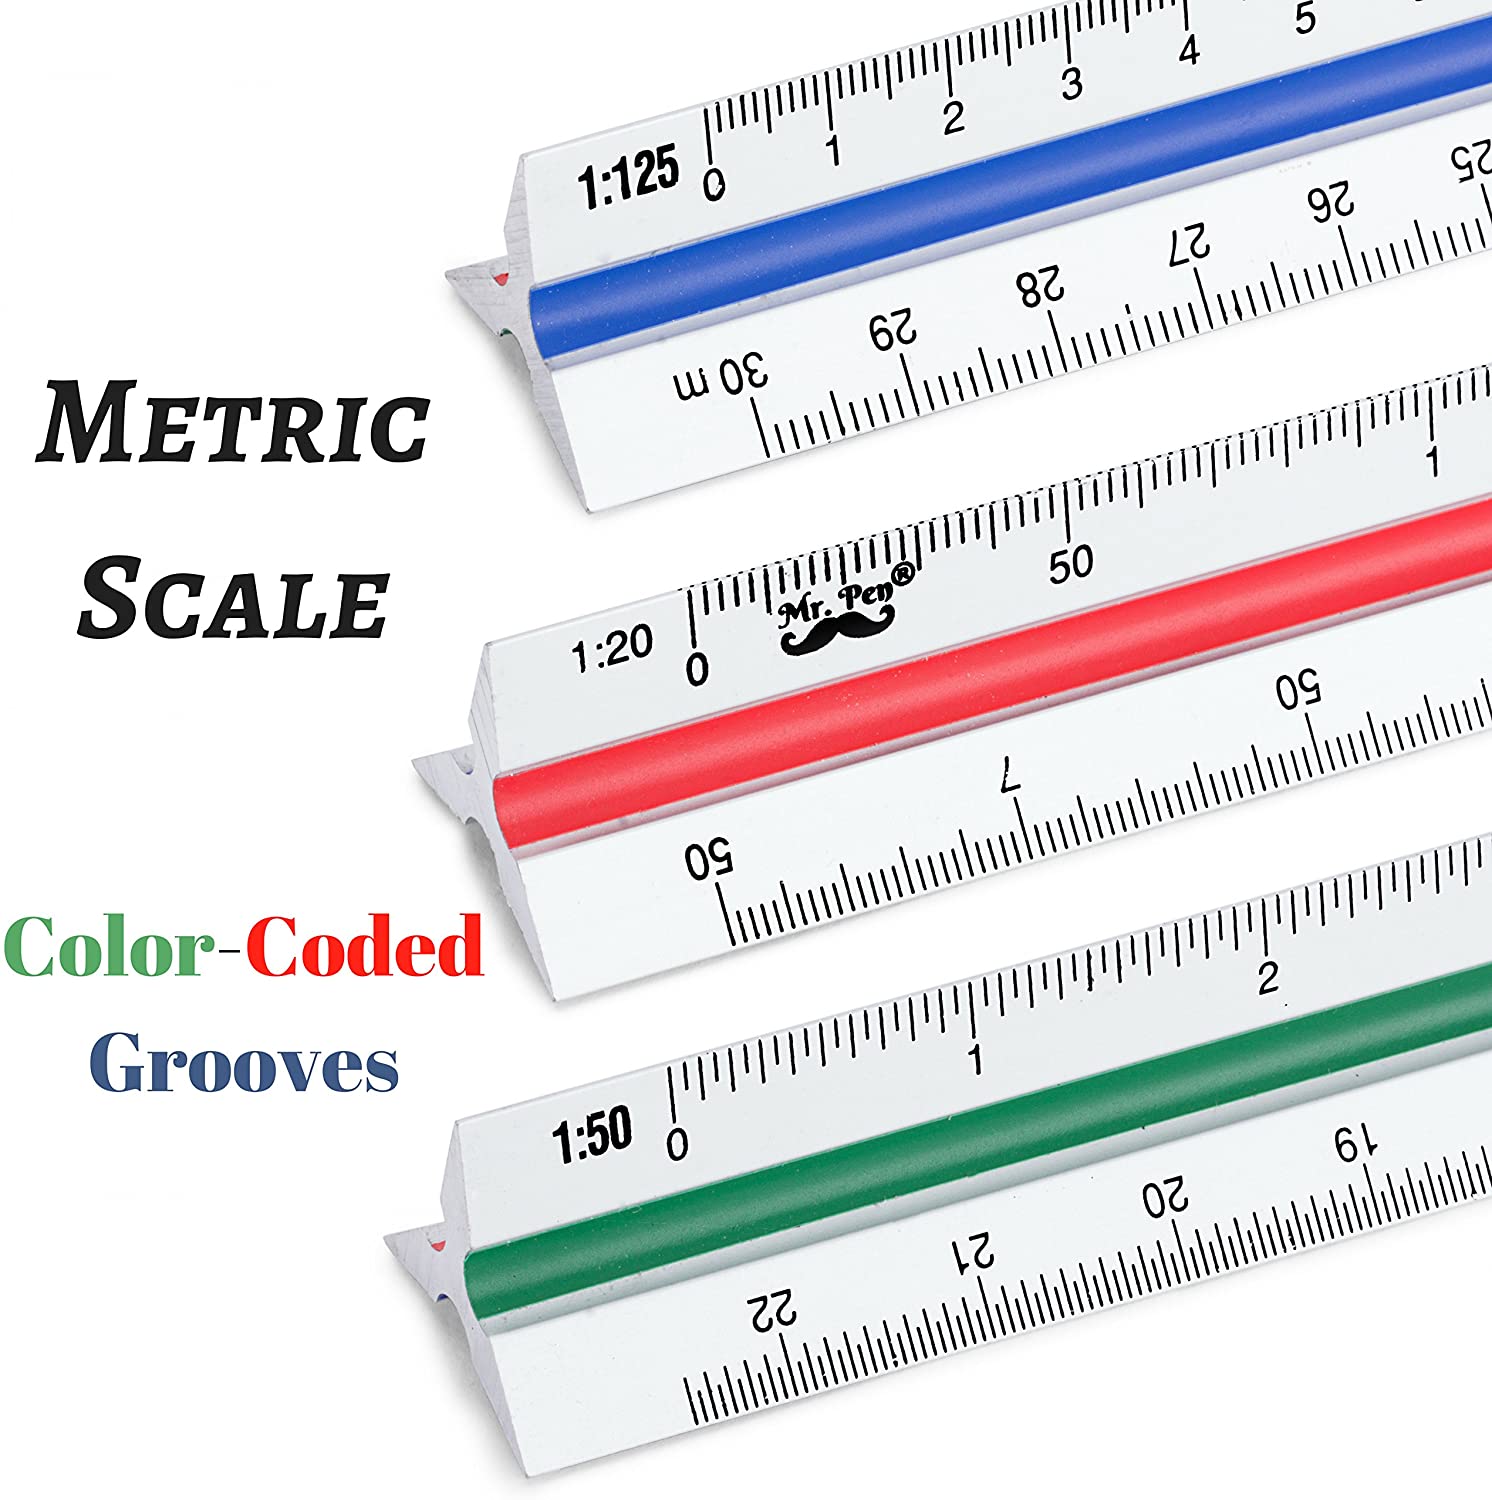 Detail To Scale Ruler Image Nomer 51